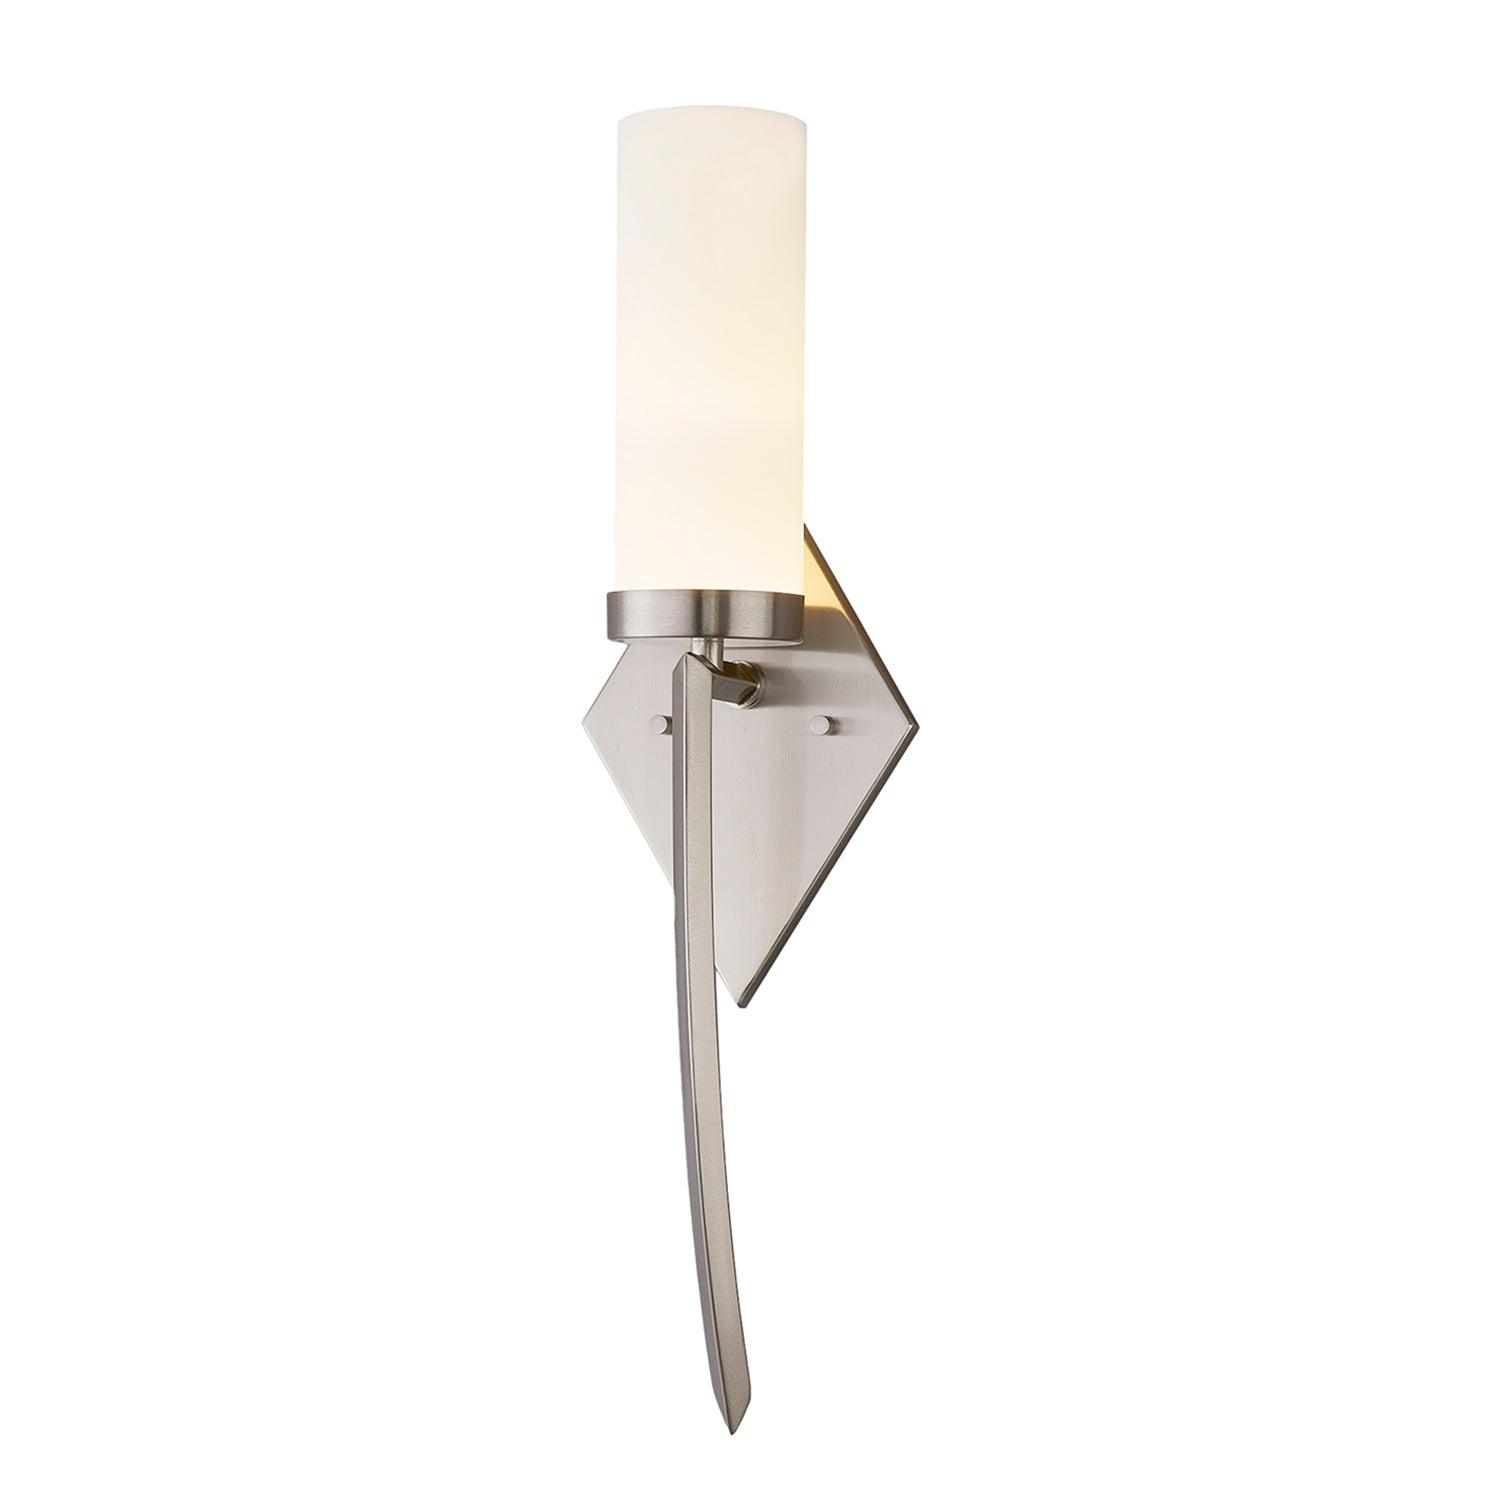 Justice Designs - Pointe LED Wall Sconce - FSN-4031-OPAL-NCKL | Montreal Lighting & Hardware